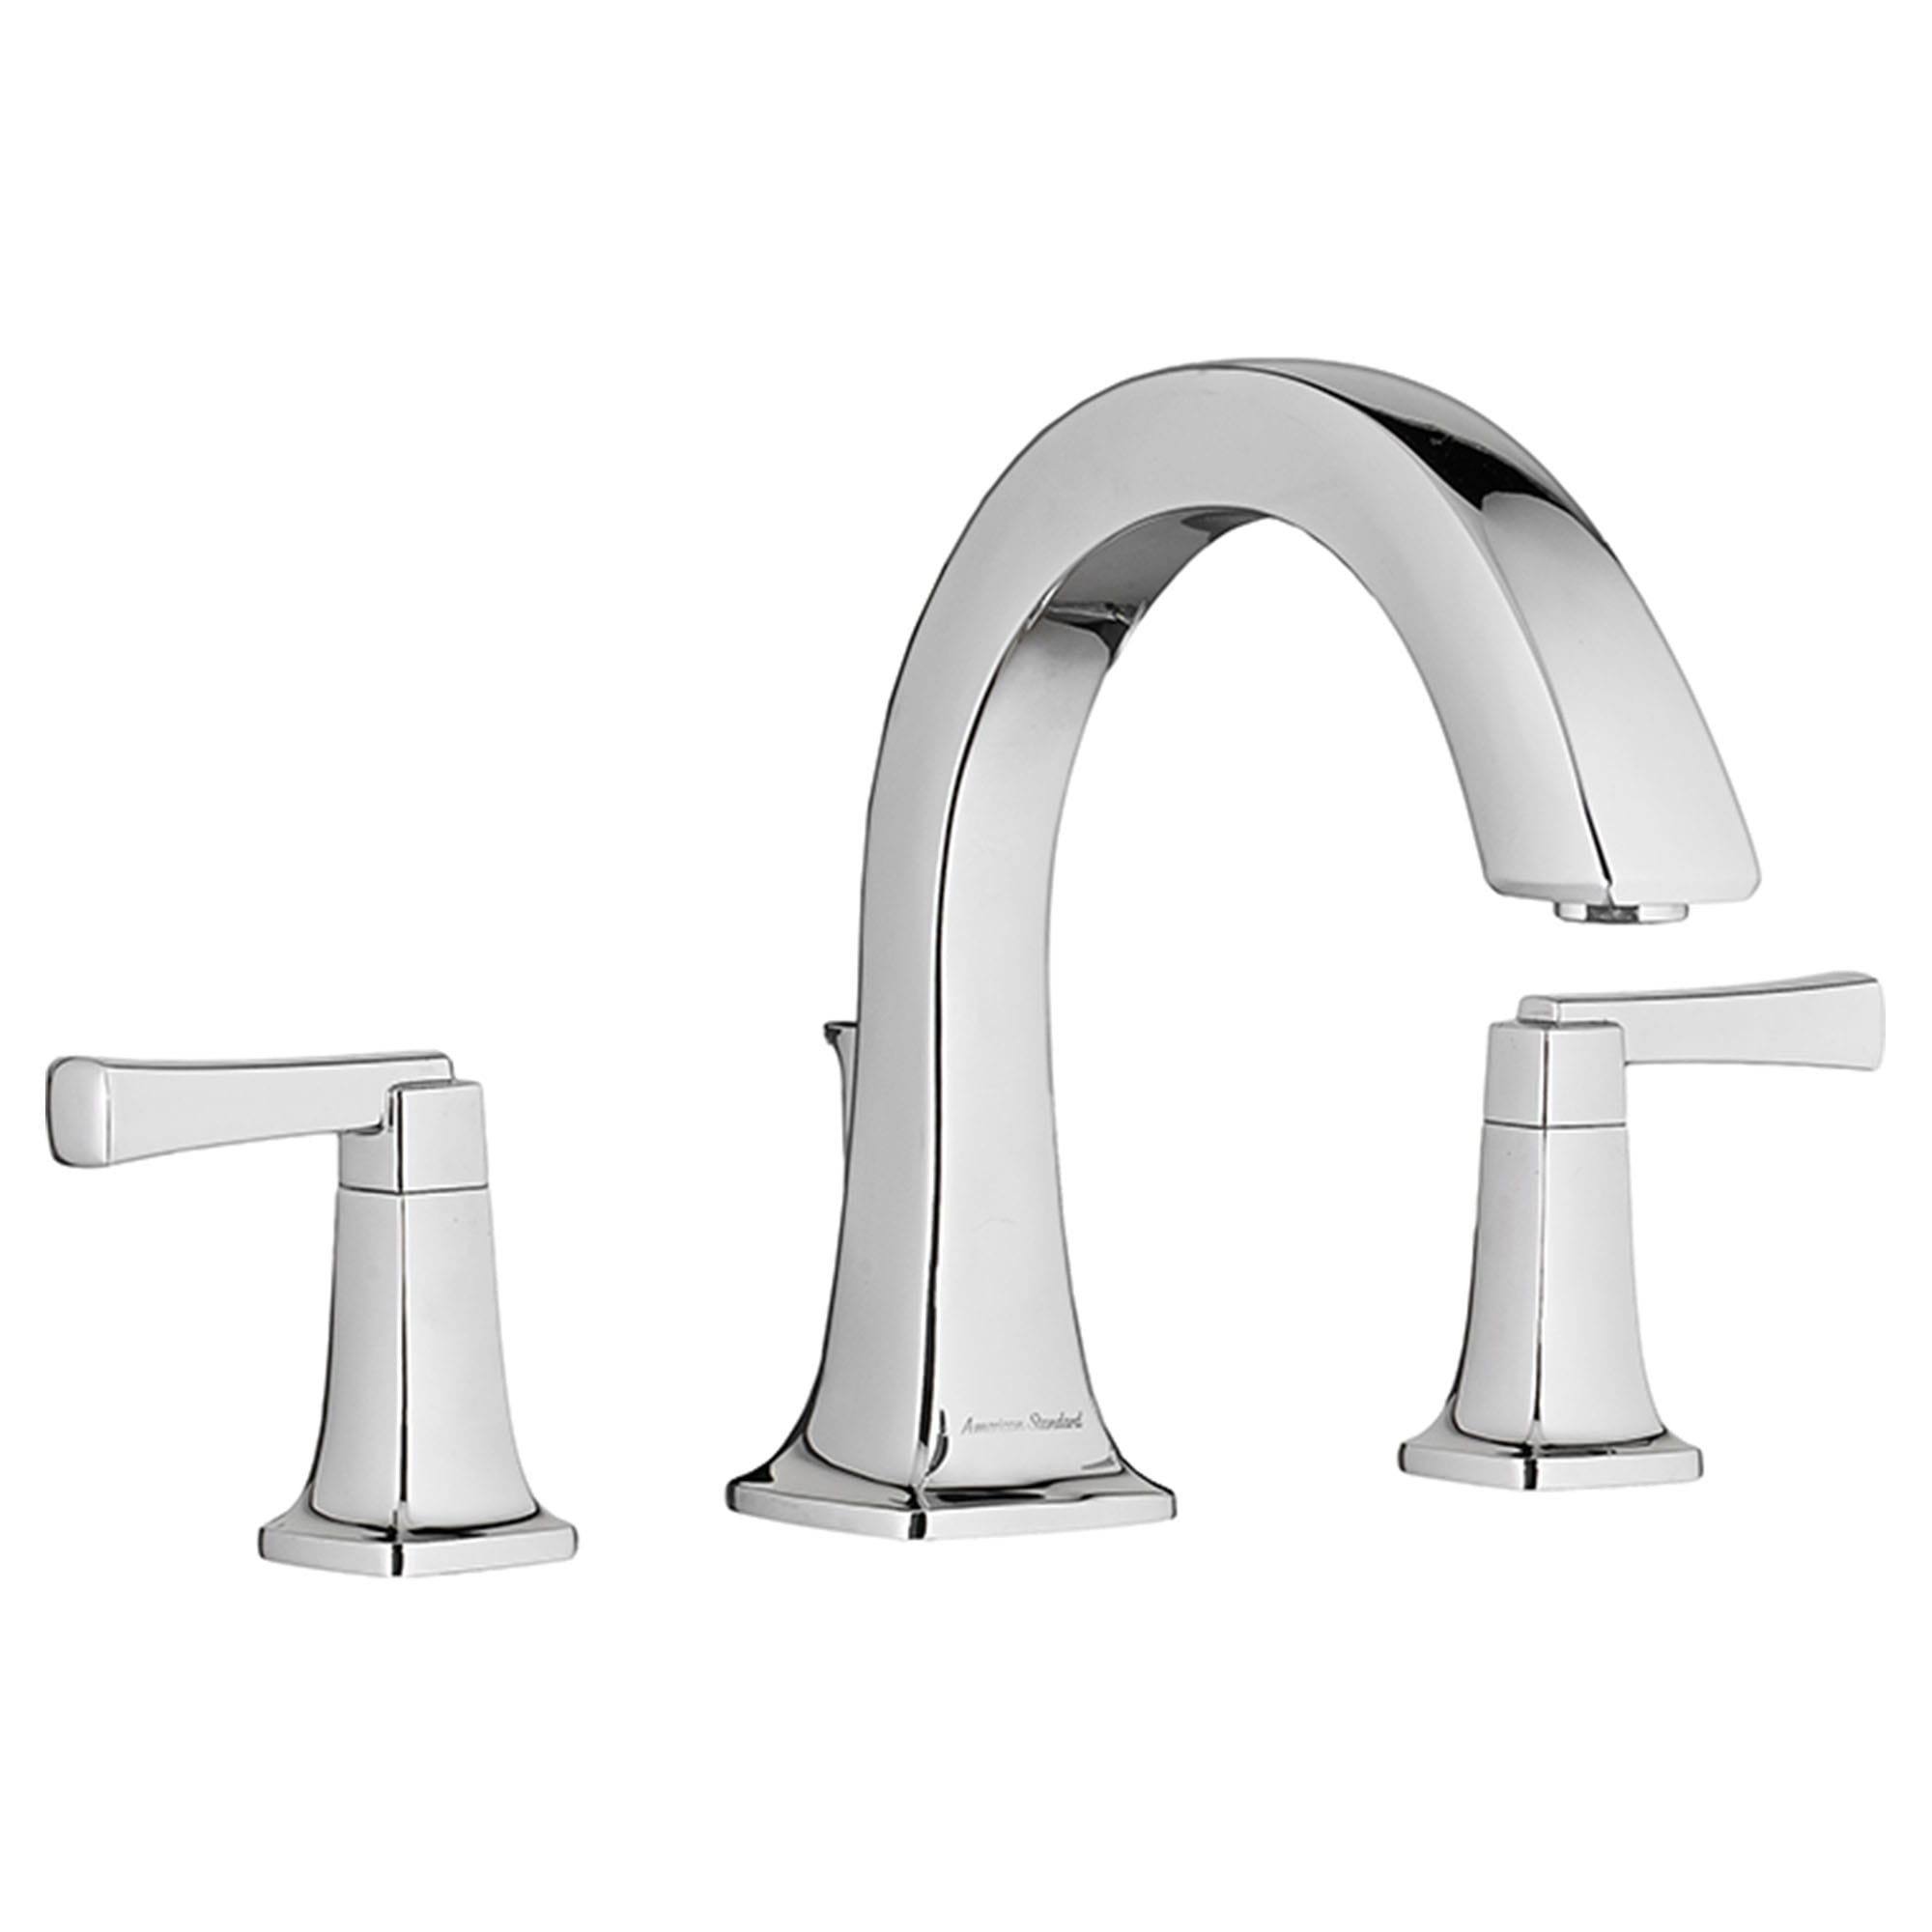 Townsend Bathtub Faucet With Lever Handles For Flash Rough In Valve